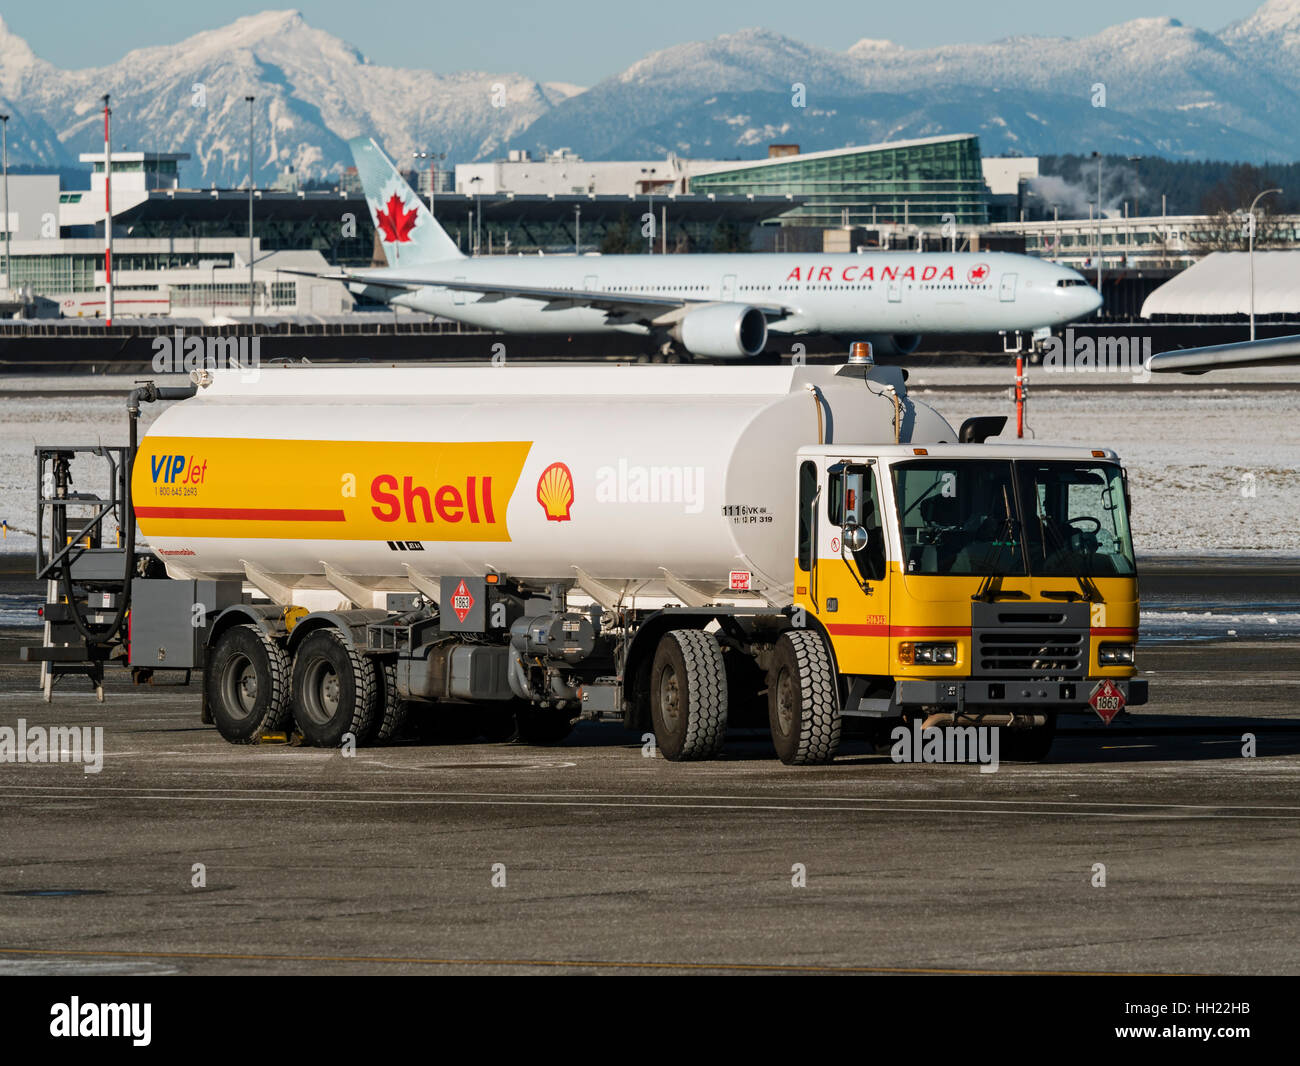 A Shell Aviation fuel tanker truck on the tarmac at Vancouver International Airport, Richmond, B.C., January 4, 2017. In the background an Air Canada  Stock Photo